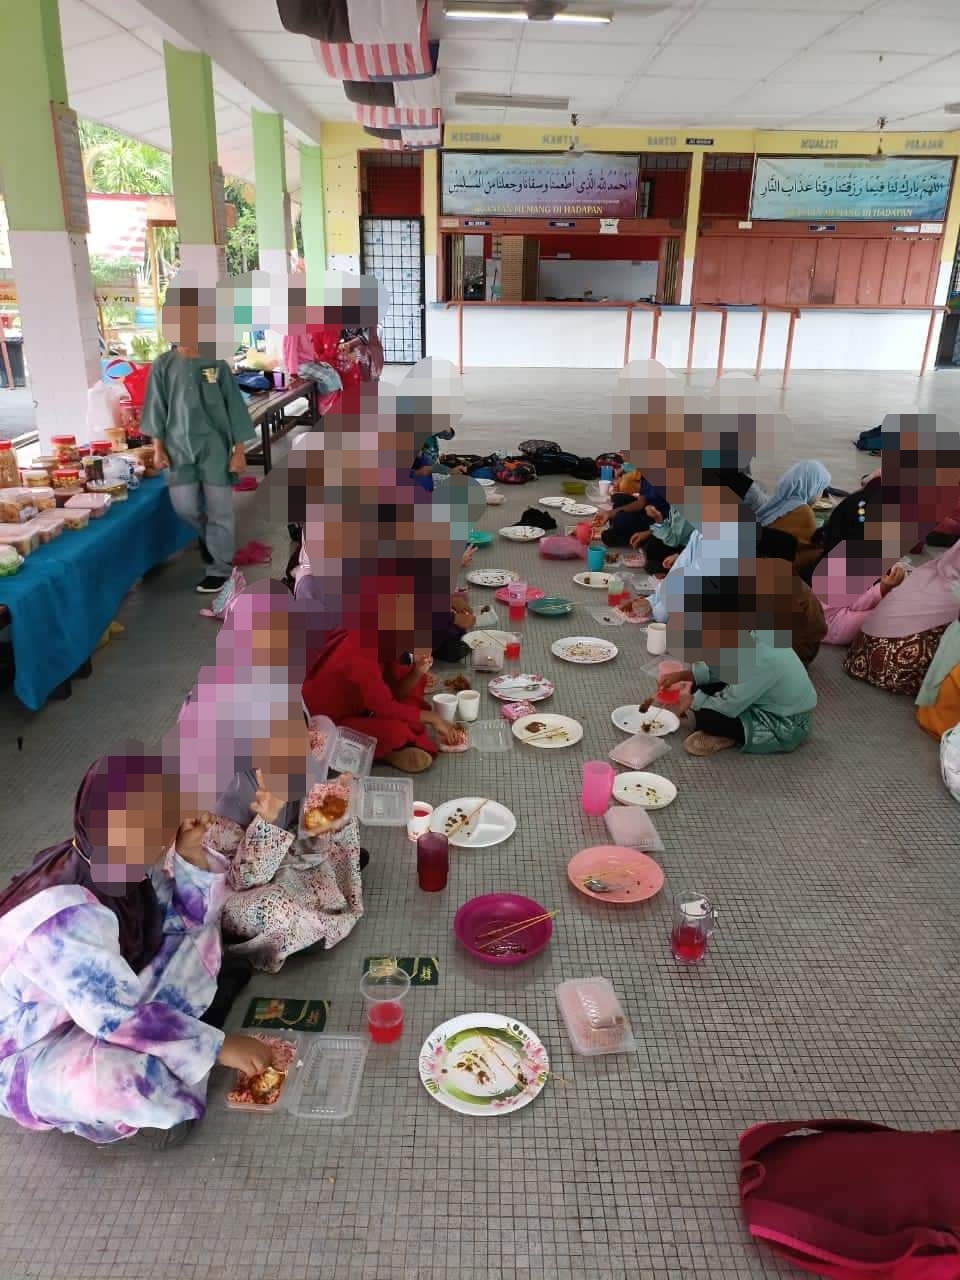 Students from a local school were allegedly seen dining on the floor, while teachers ate at banquet tables. Image credit: Mohd Fadli Salleh